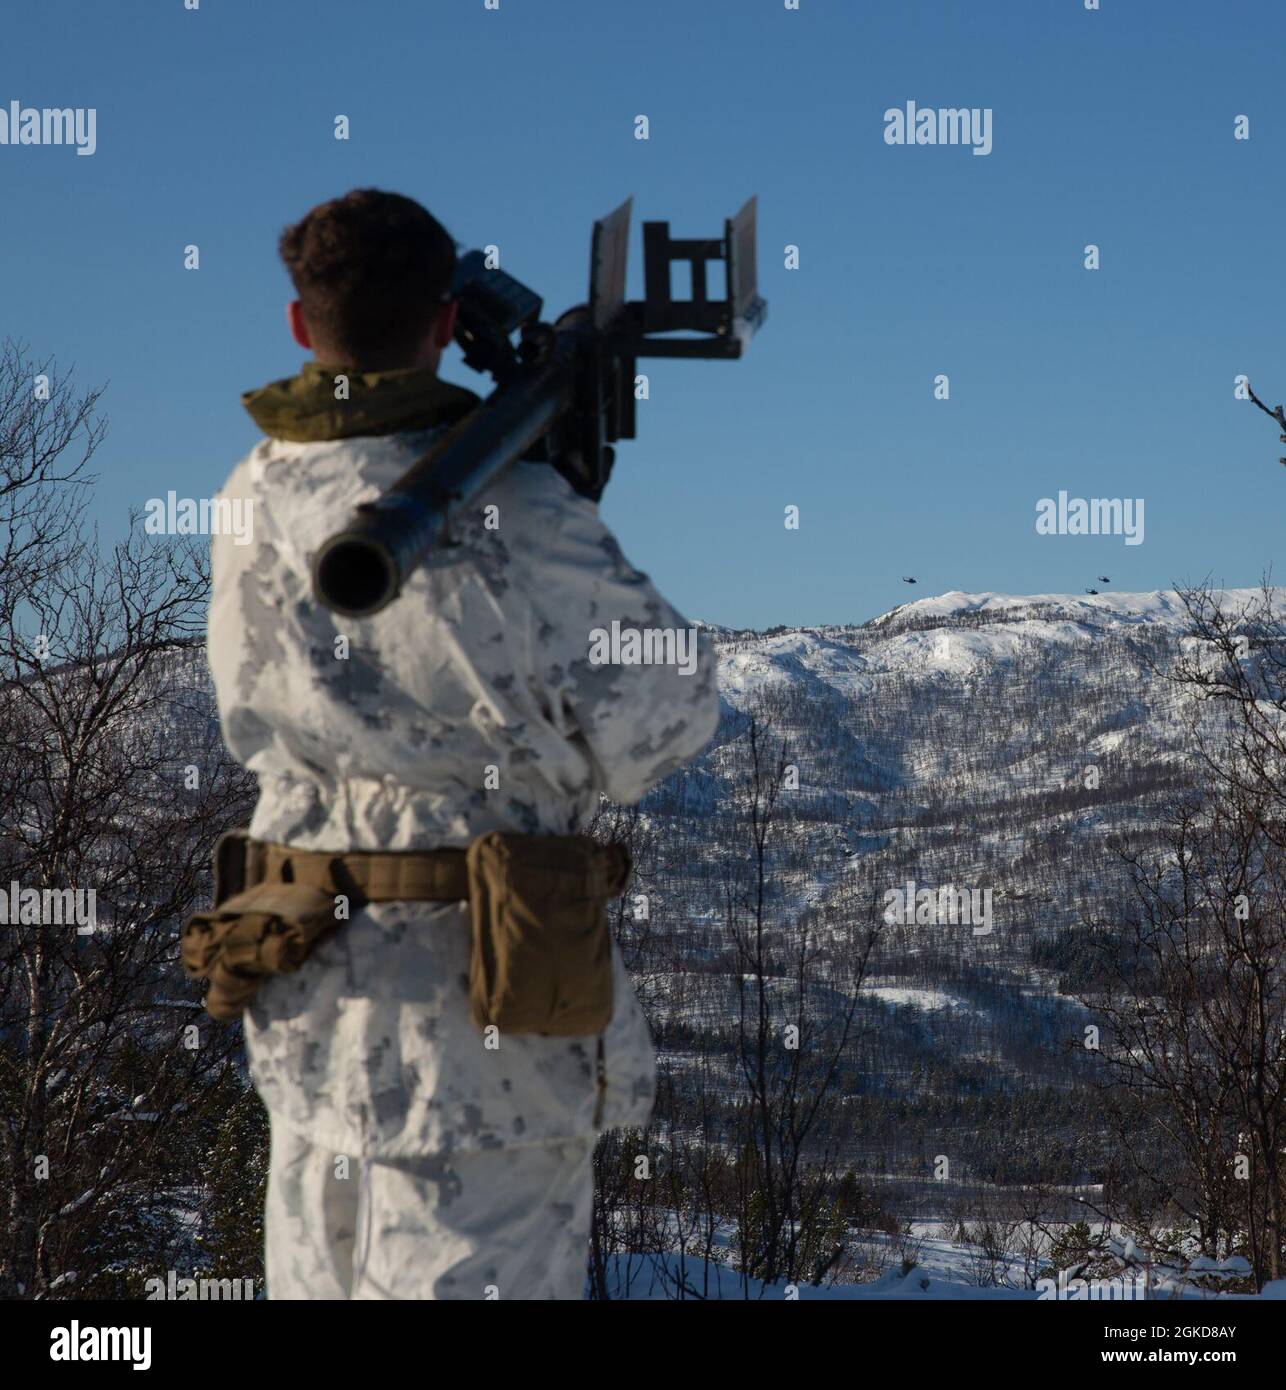 A U.S. Marine with Marine Rotational Force Europe 21.1 (MRF-E), Marine Forces Europe and Africa, utilizes the FIM-92 Stinger during a routine training event in Setermoen, Norway, March 18, 2021. This event focused on locating and notionally shooting down air threats. MRF-E focuses on regional engagements throughout Europe by conducting various exercises, arctic cold-weather and mountain warfare training, and military-to-military engagements, which enhance overall interoperability of the U.S. Marine Corps with allies and partners. Stock Photo